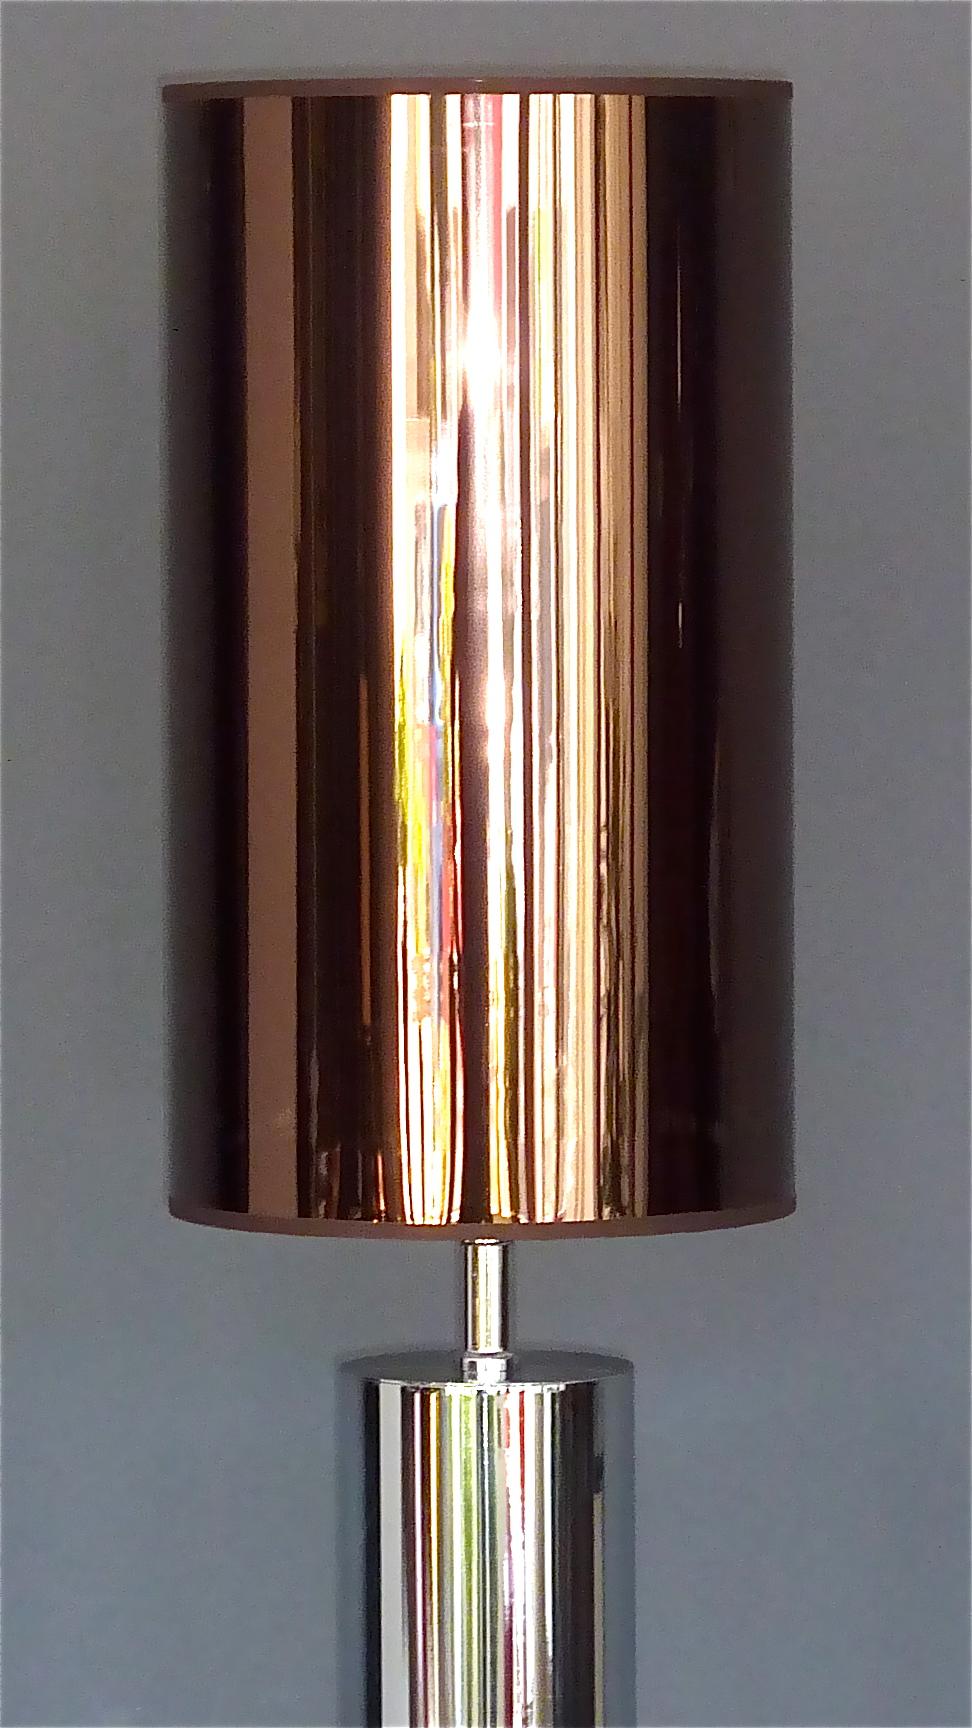 Late 20th Century Monumental Chrome Steel Table Lamp Willy Rizzo Cardin Style Bronze Mirror 1970s For Sale